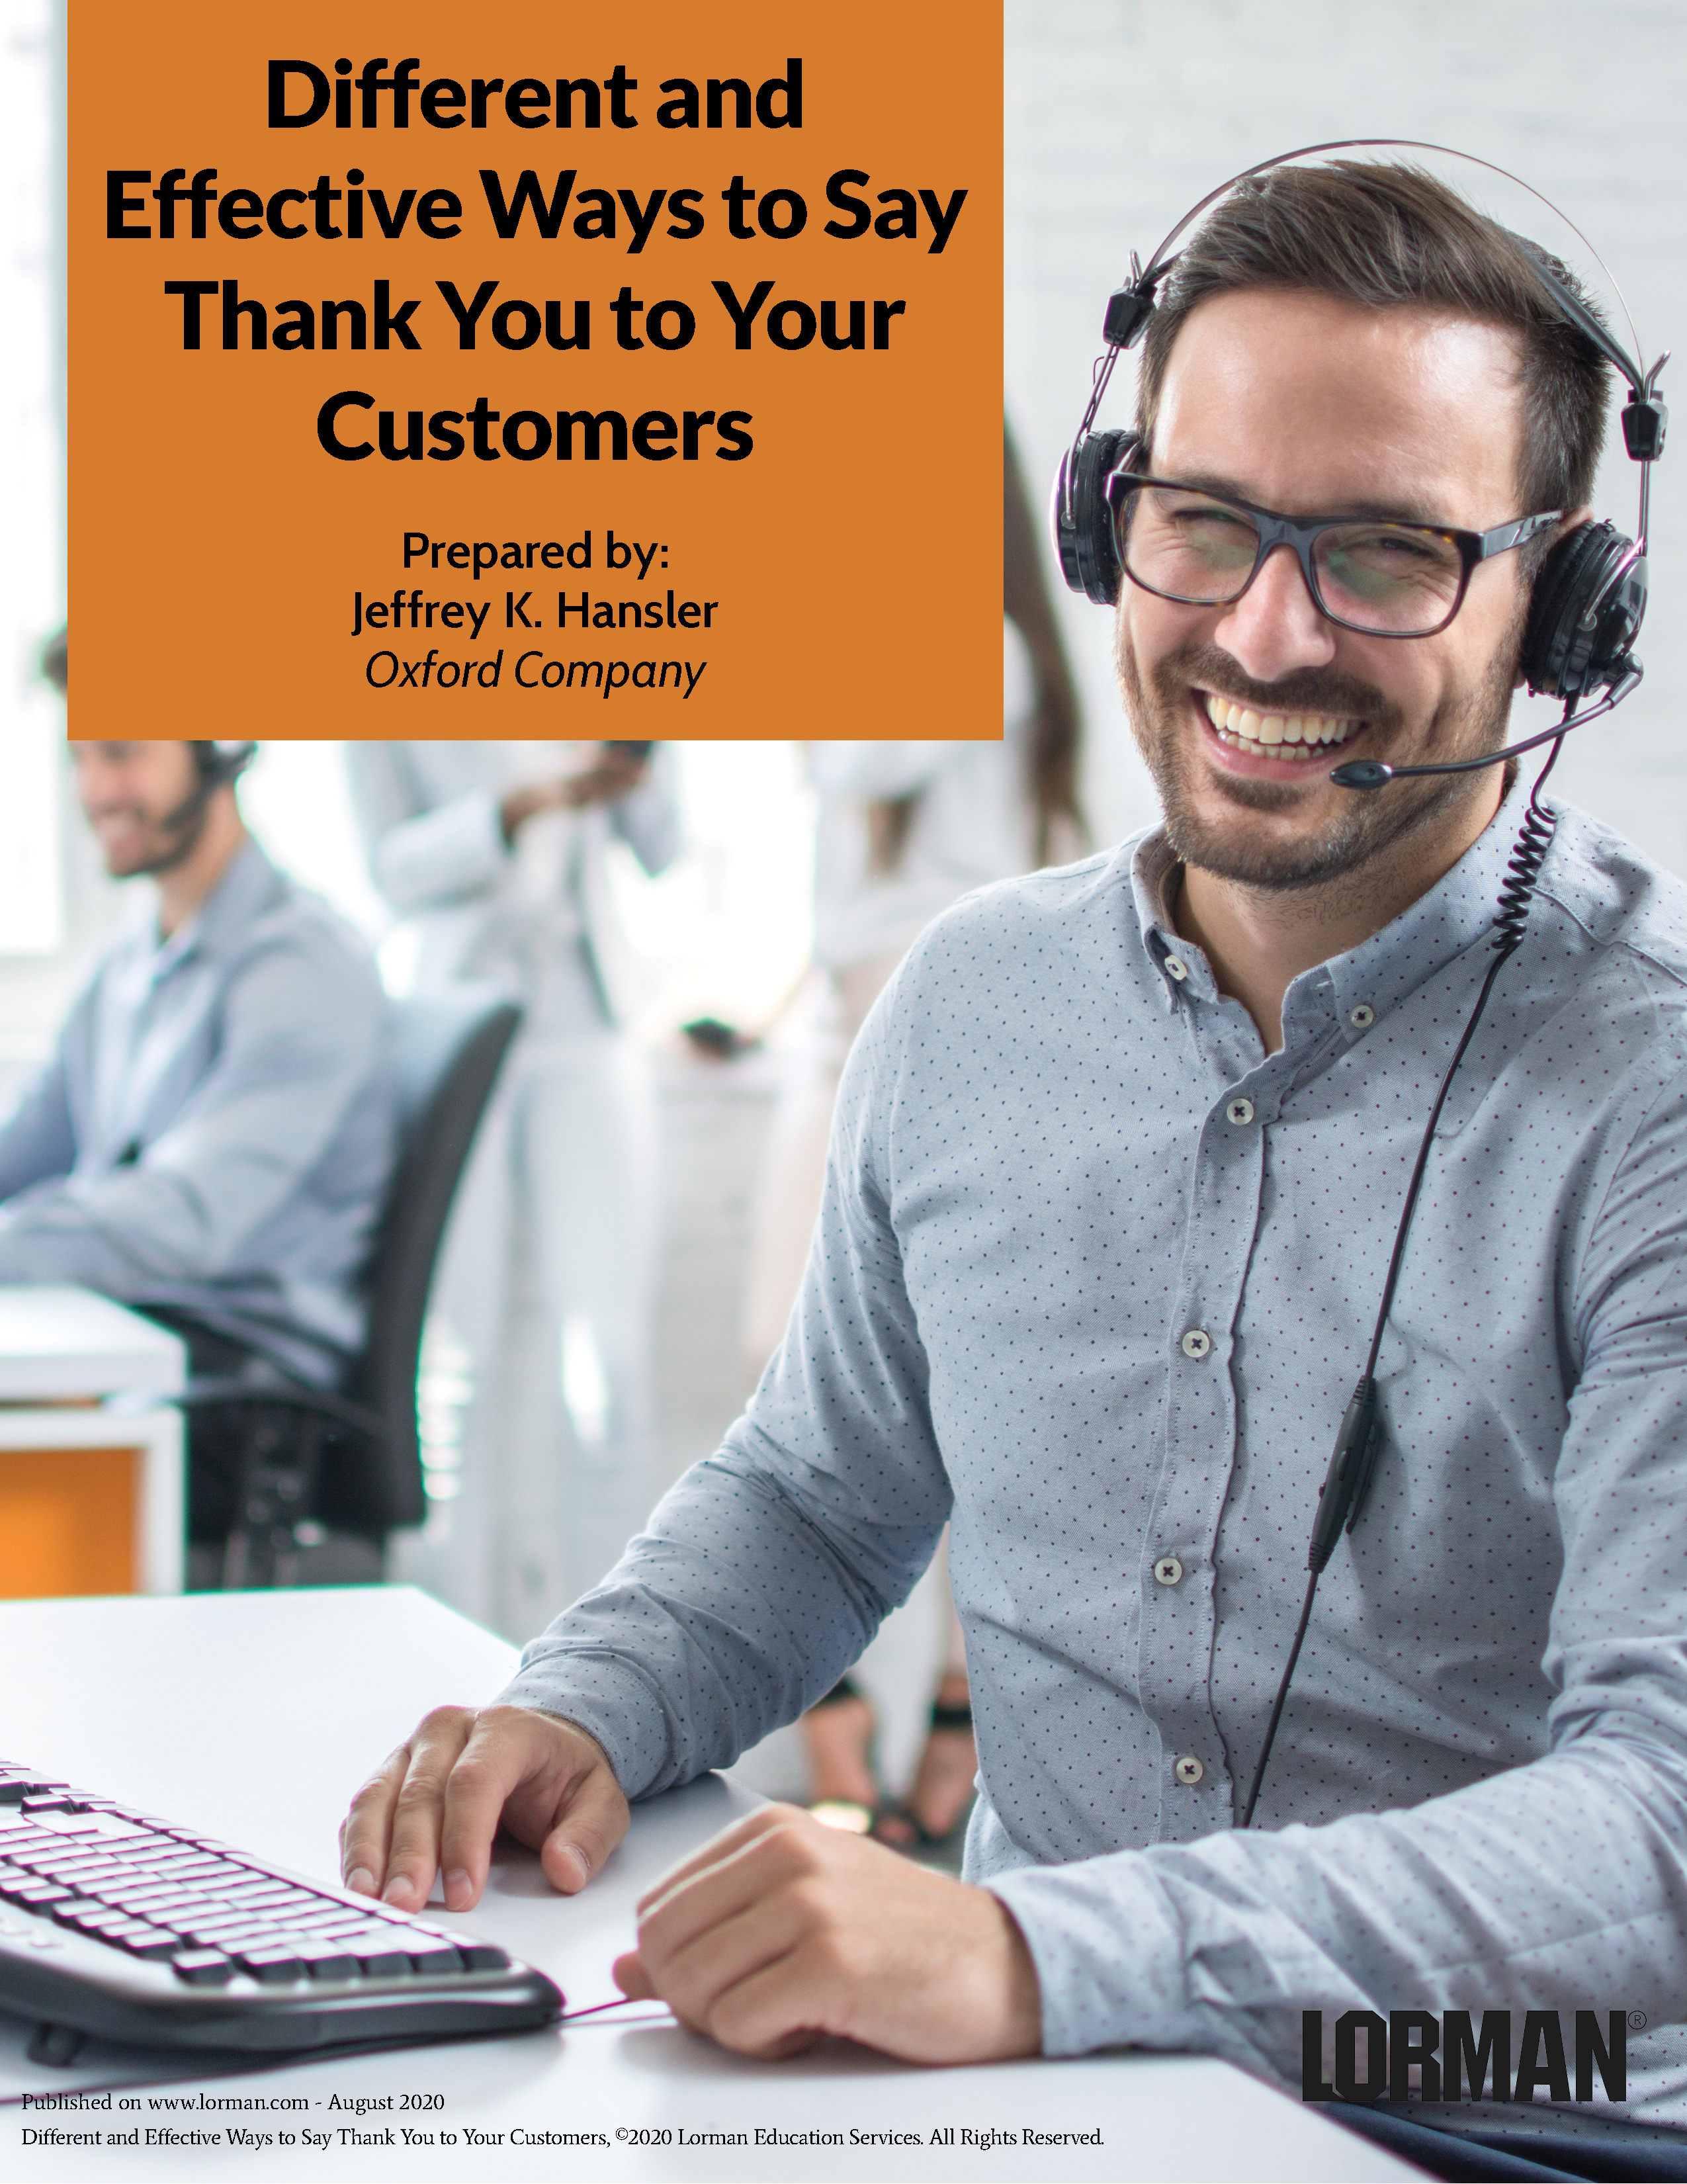 Different and Effective Ways to Say Thank You to Your Customers